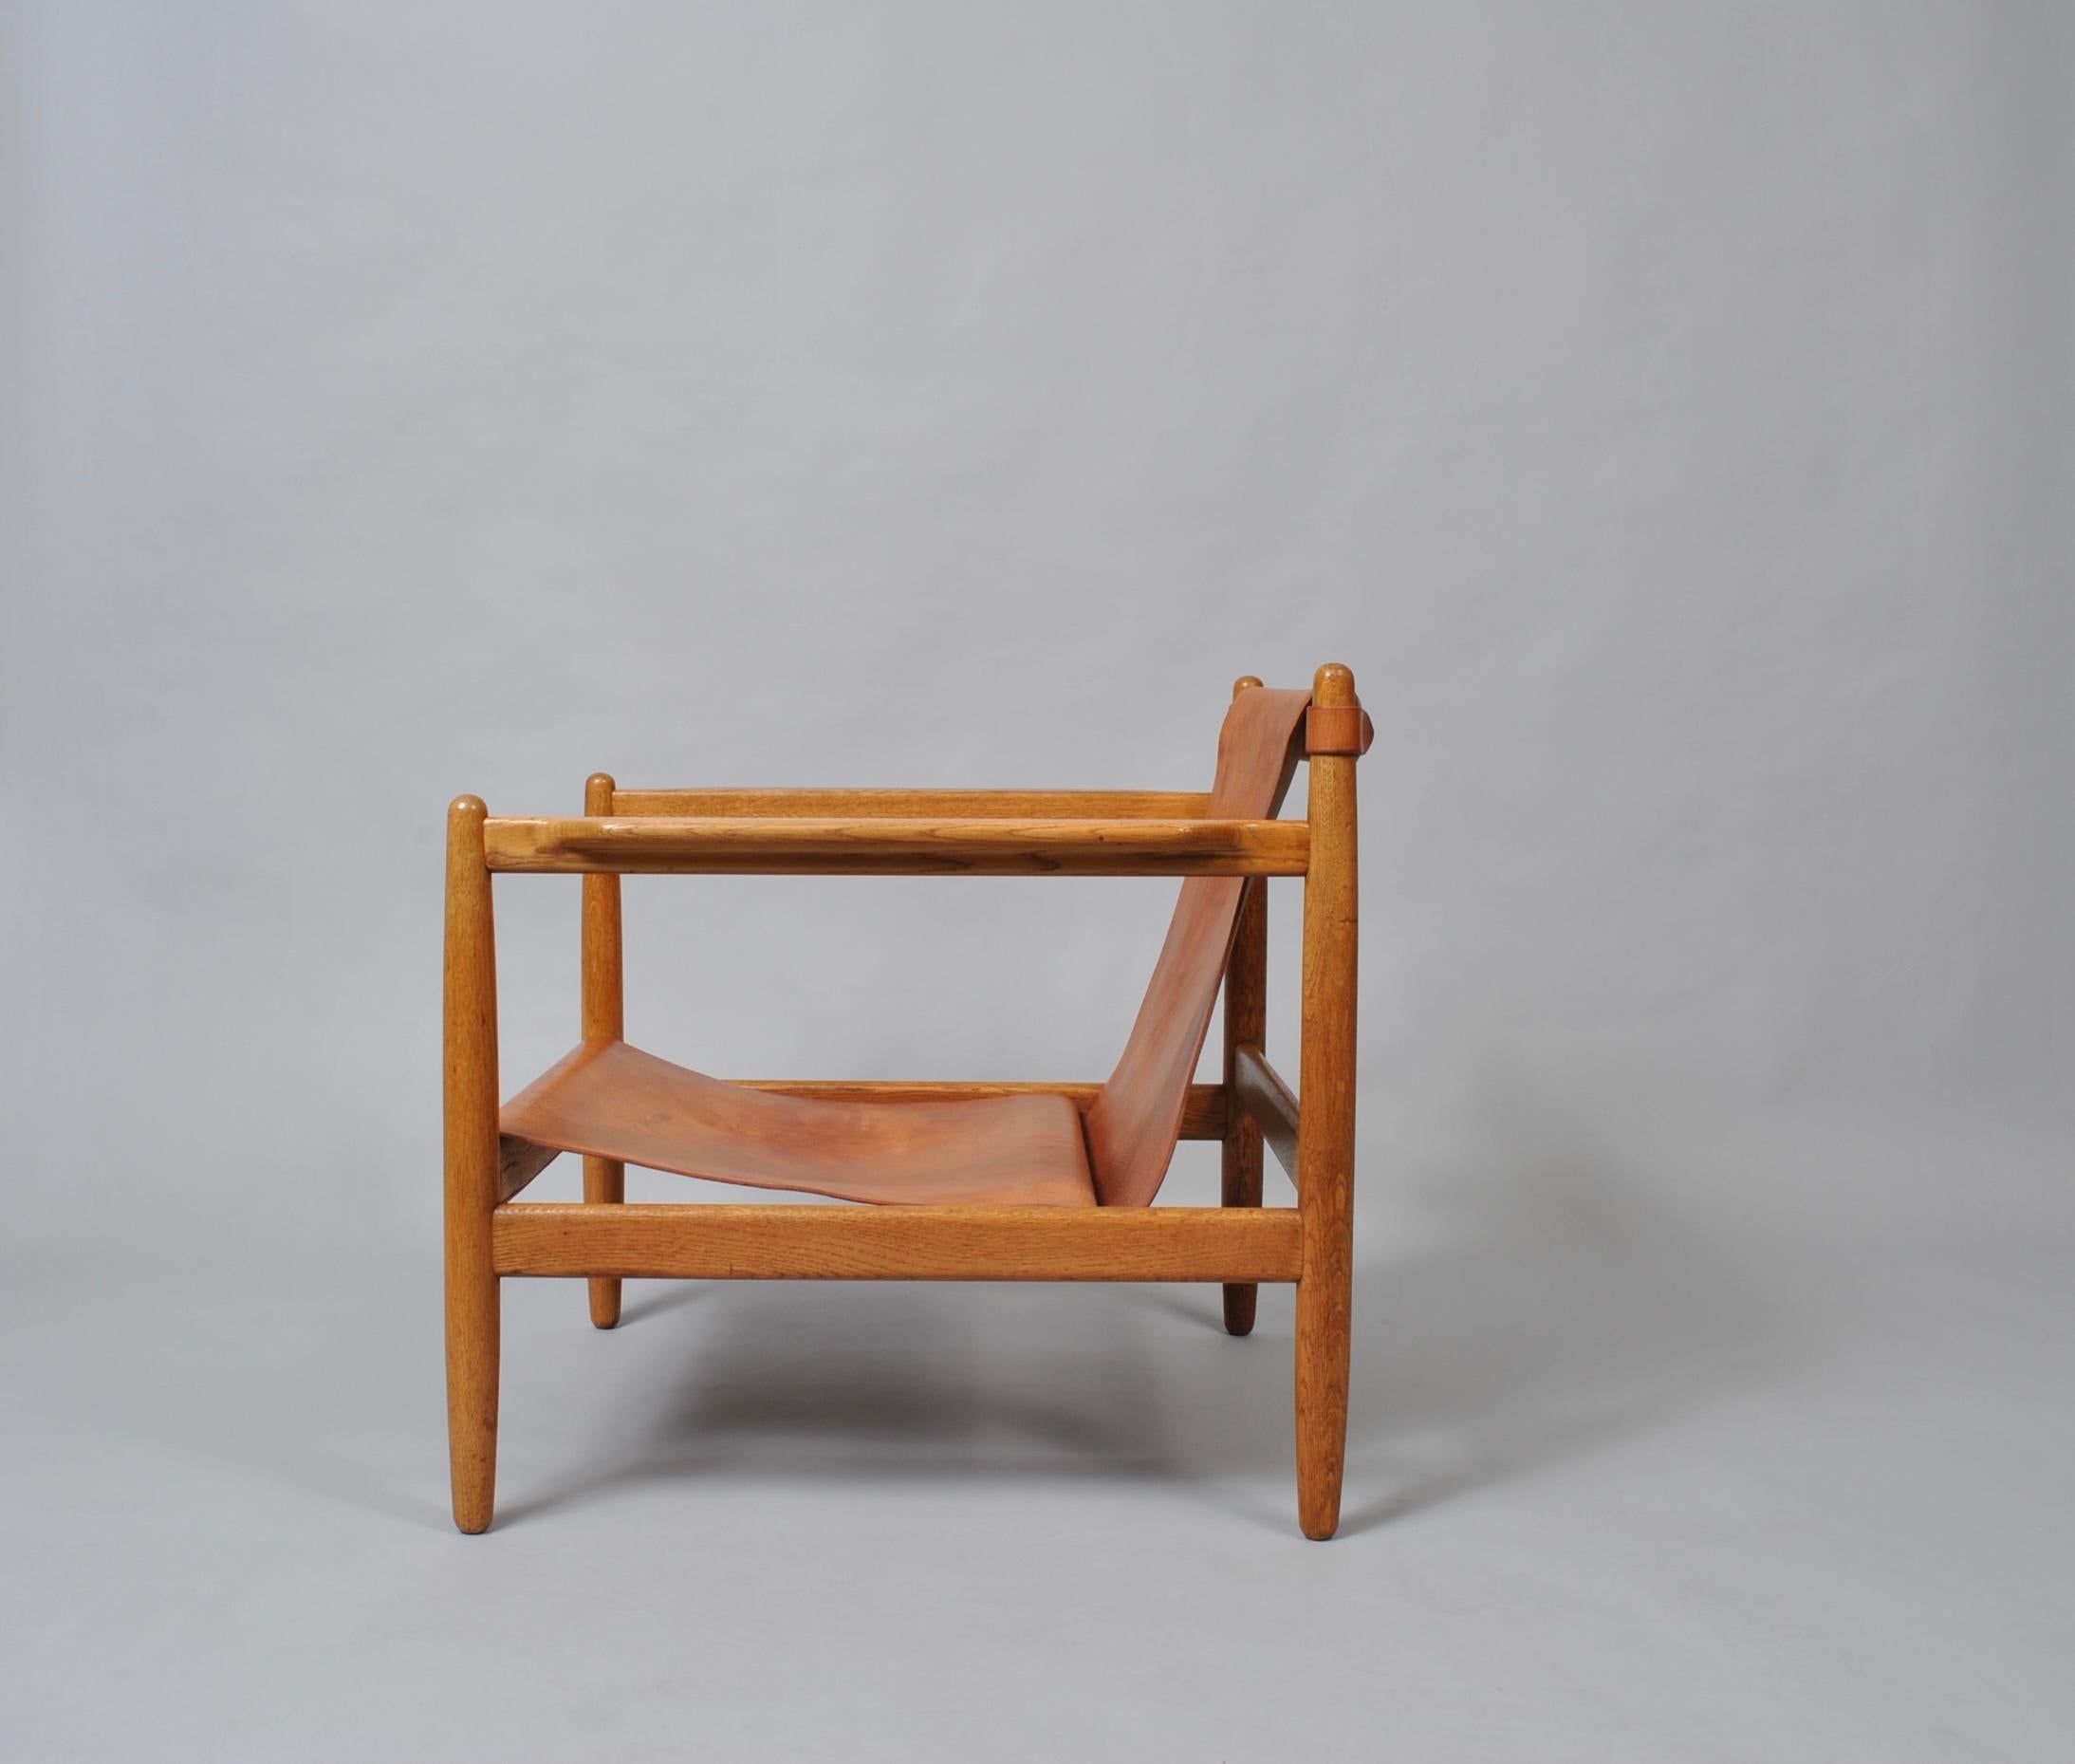 A rare lounge chair designed by Børge Mogensen for Karl Andersson. Constructed from European oak with slung tan saddle leather upholstery. This rarely available Oresund Bra-Bohag chair was produced by Karl Andersson and Sons in 1959, Sweden.